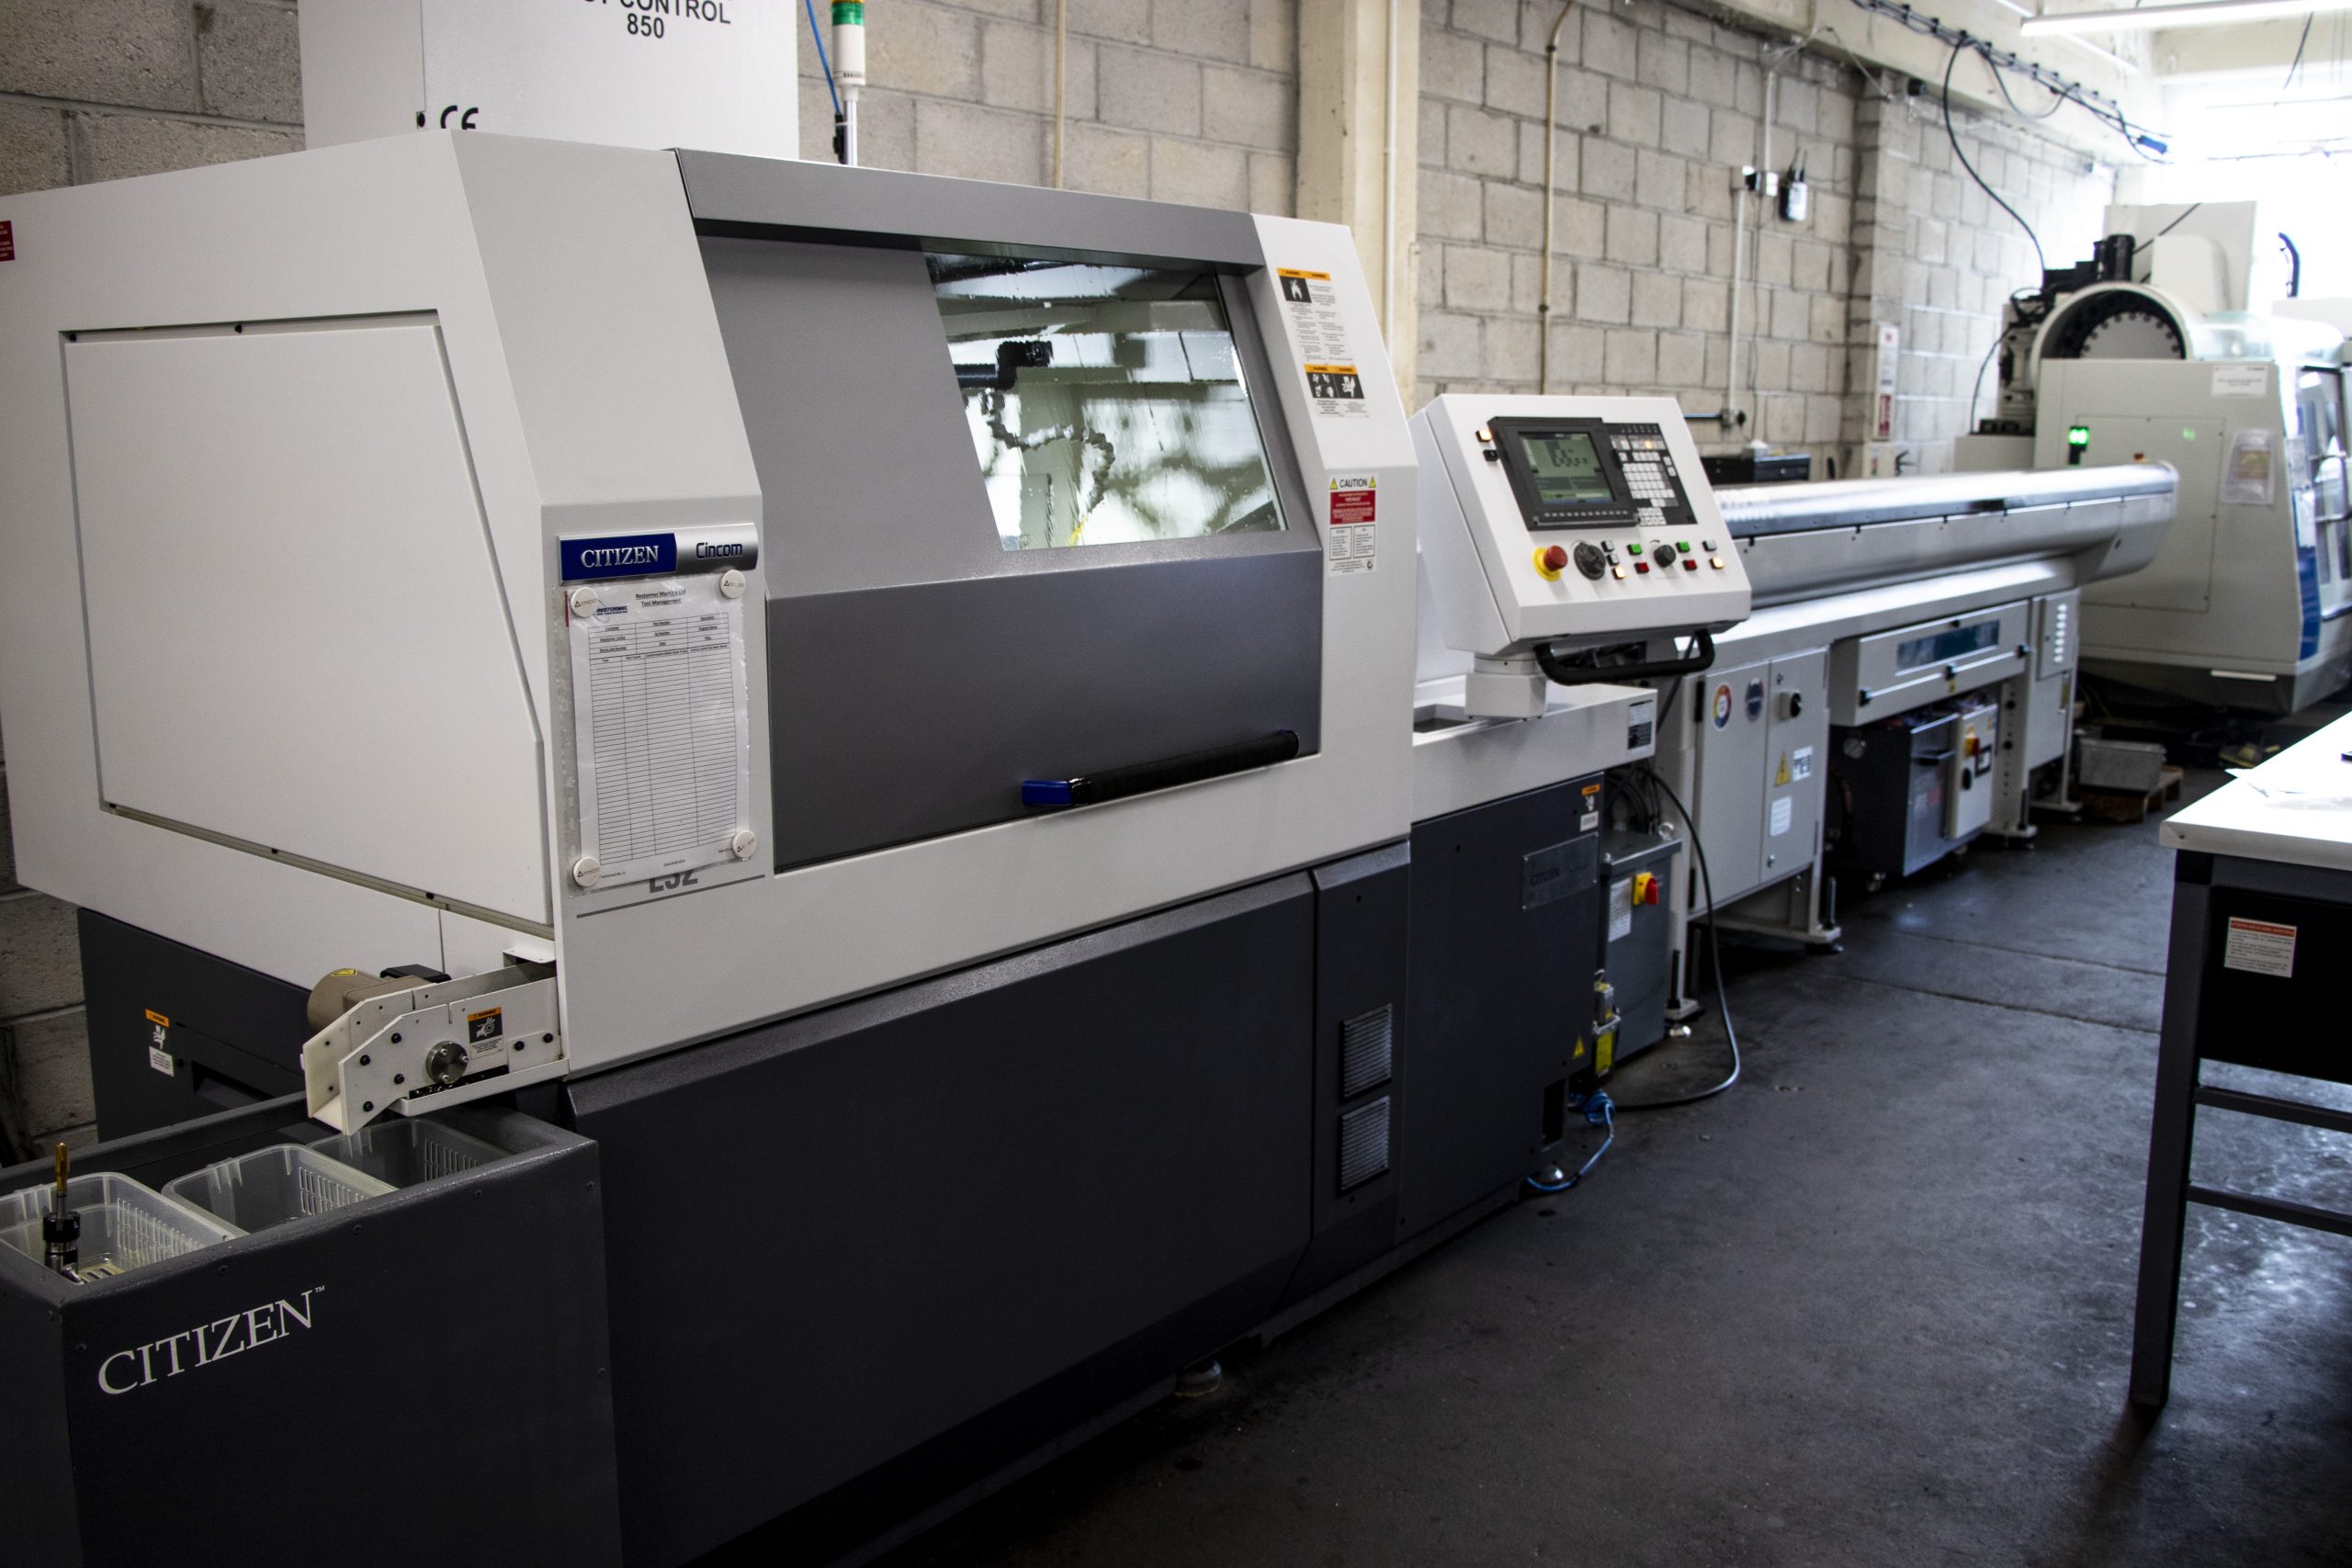 UK Providers of CNC Turning For Small Batch Production